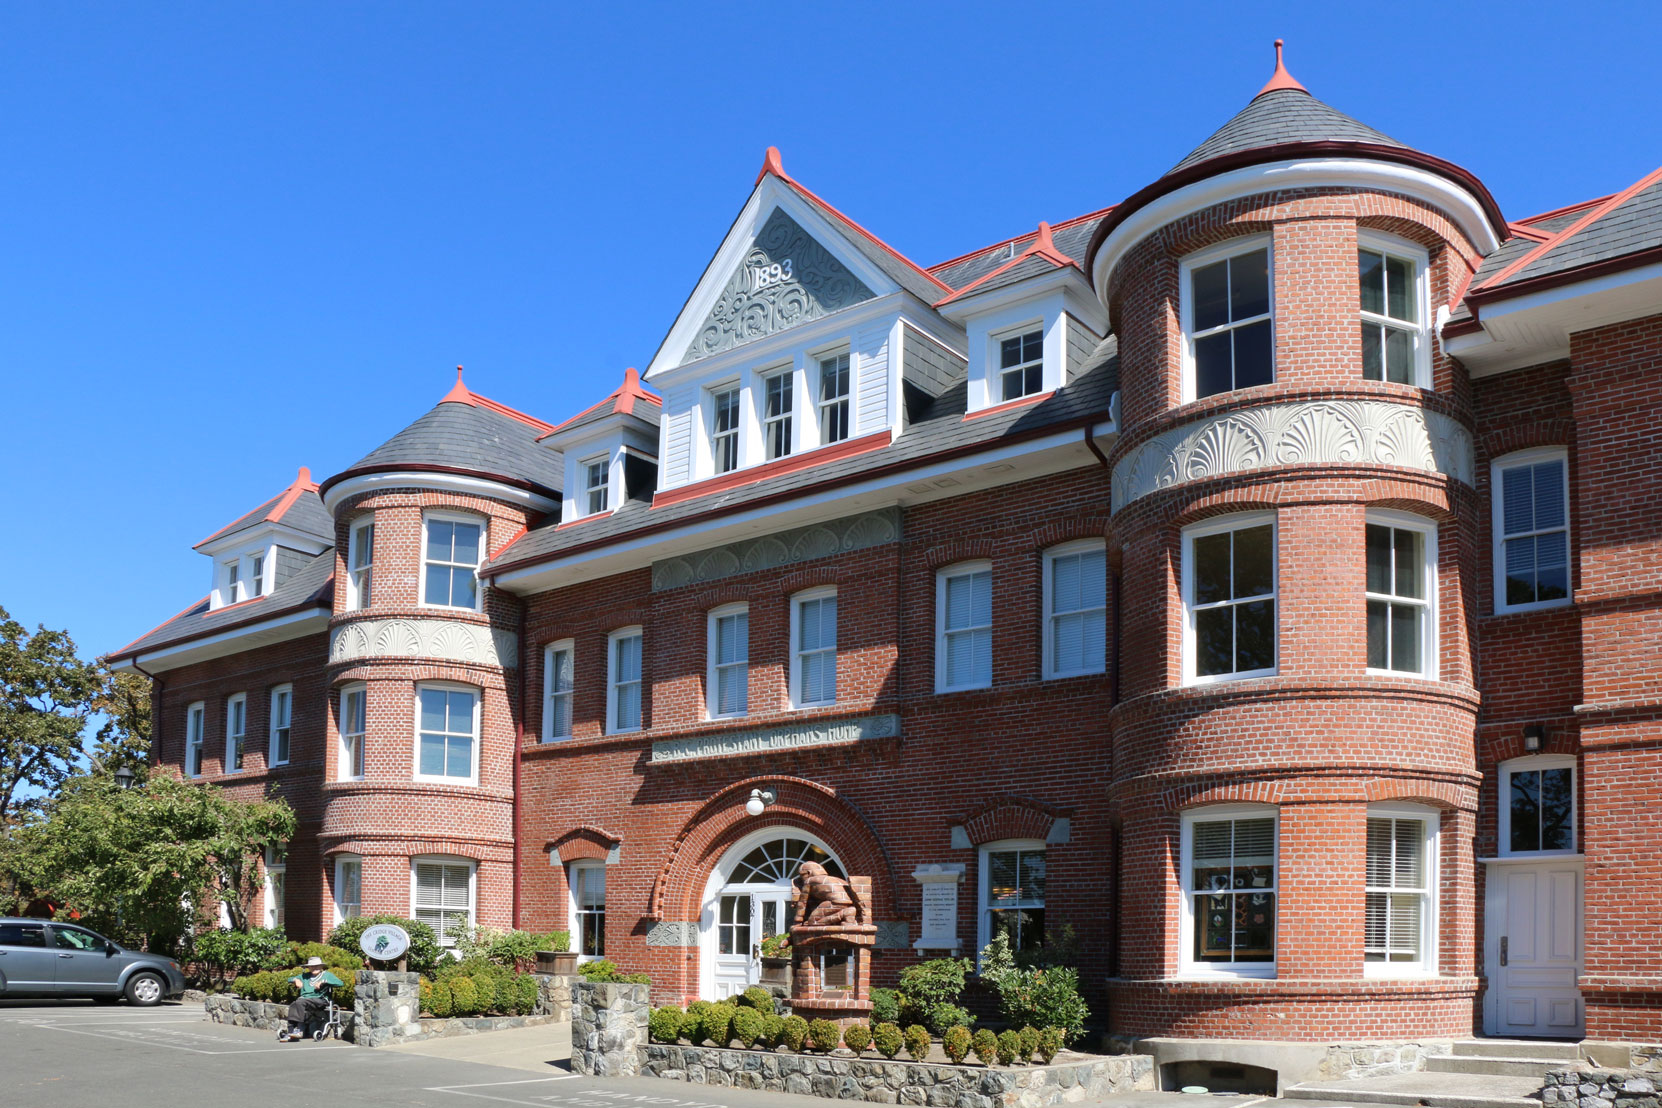 The Cridge Center, originally built in 1893 by architect Thomas Hooper as the B.C. Protestant orphans Home (photo by Victoria Online Sightseeing Tours)